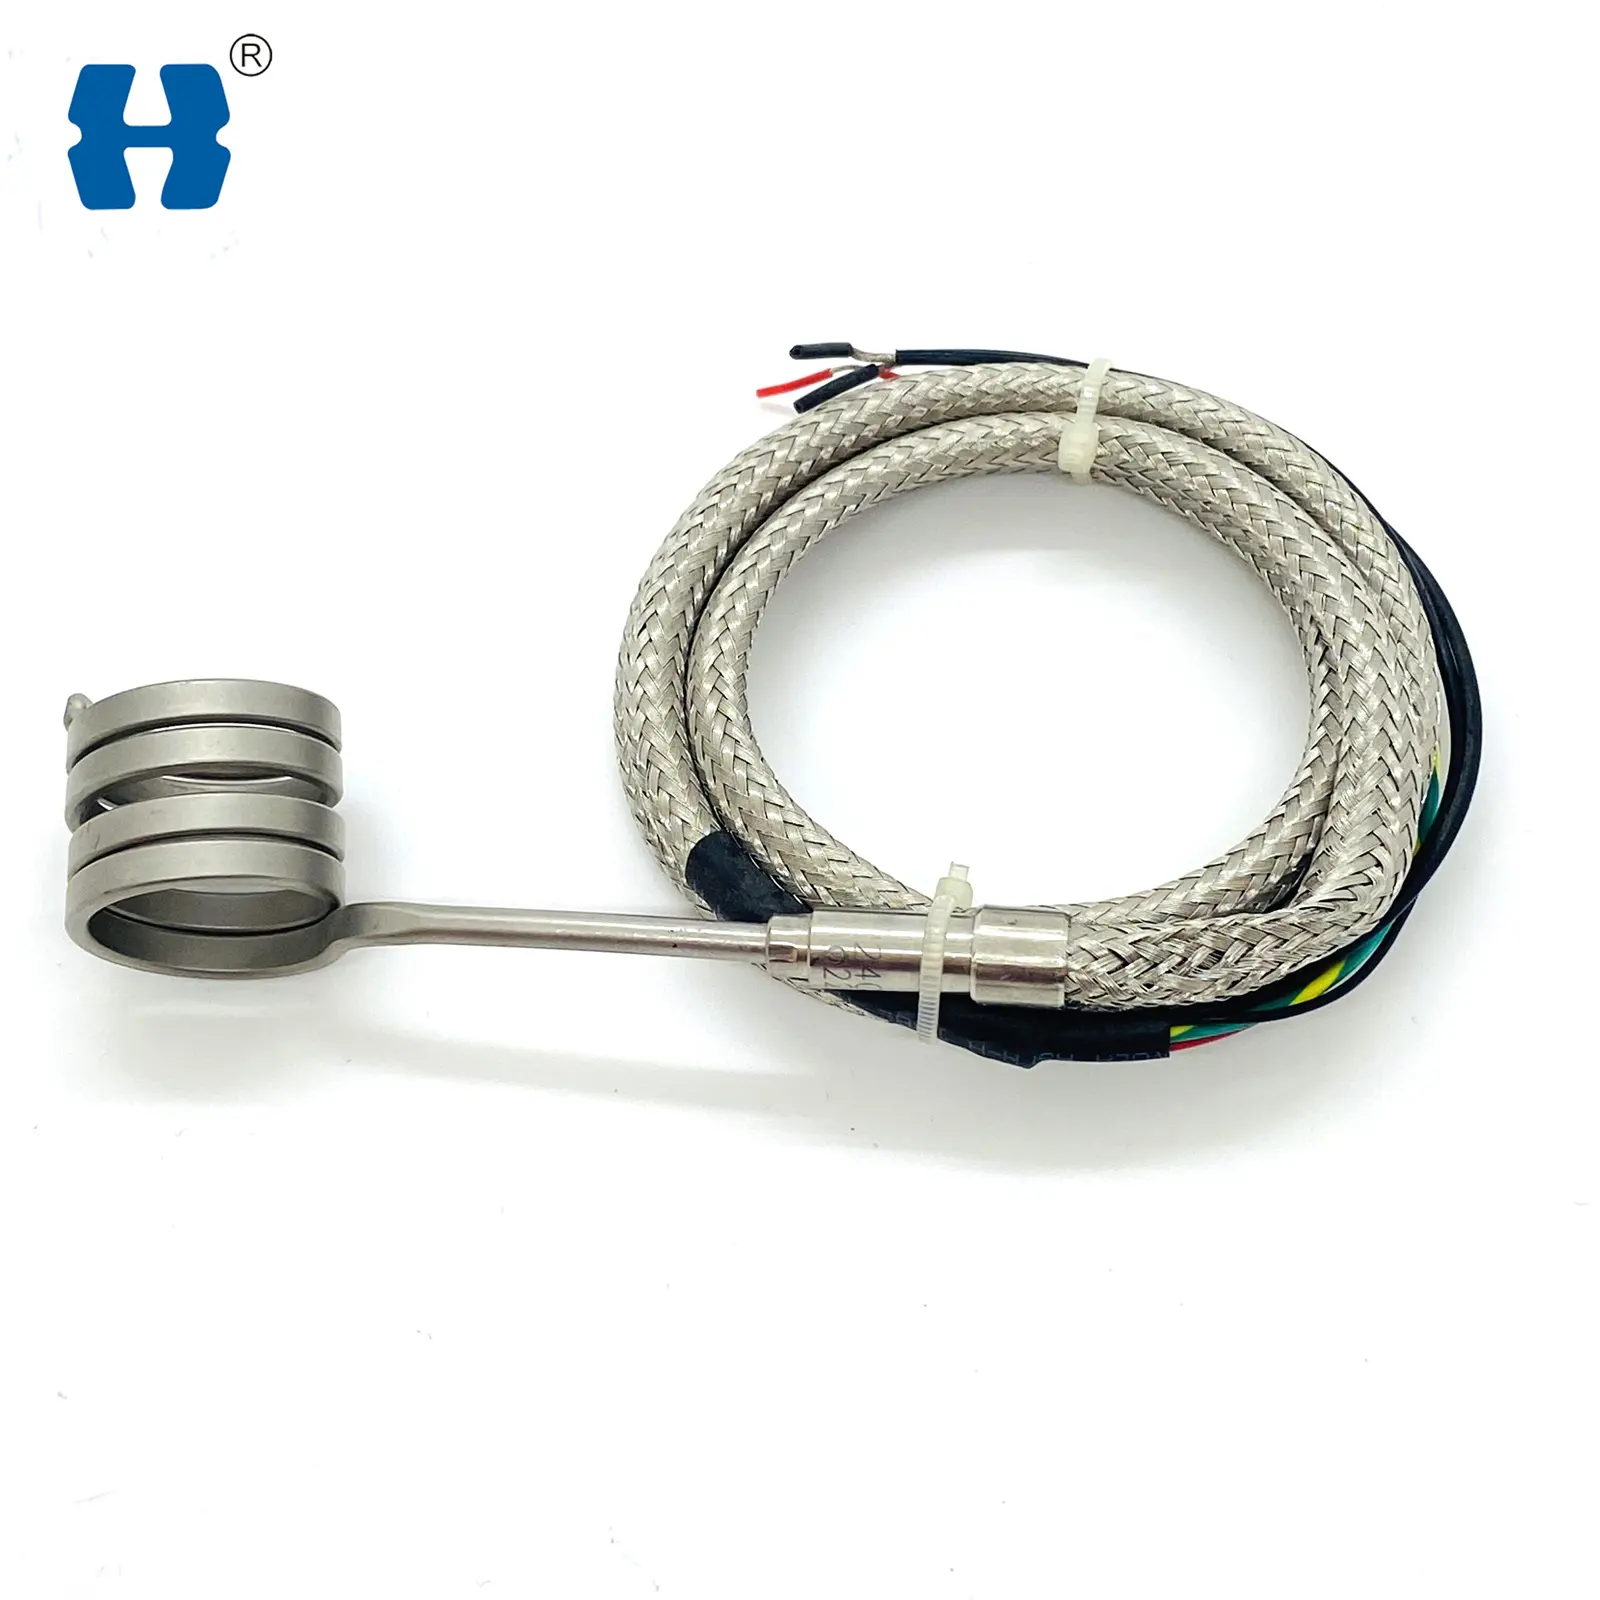 HUADONG Nickel Chrome Resistance Wire Coil Heater Used In Packaging Machinery And Medical Equipment